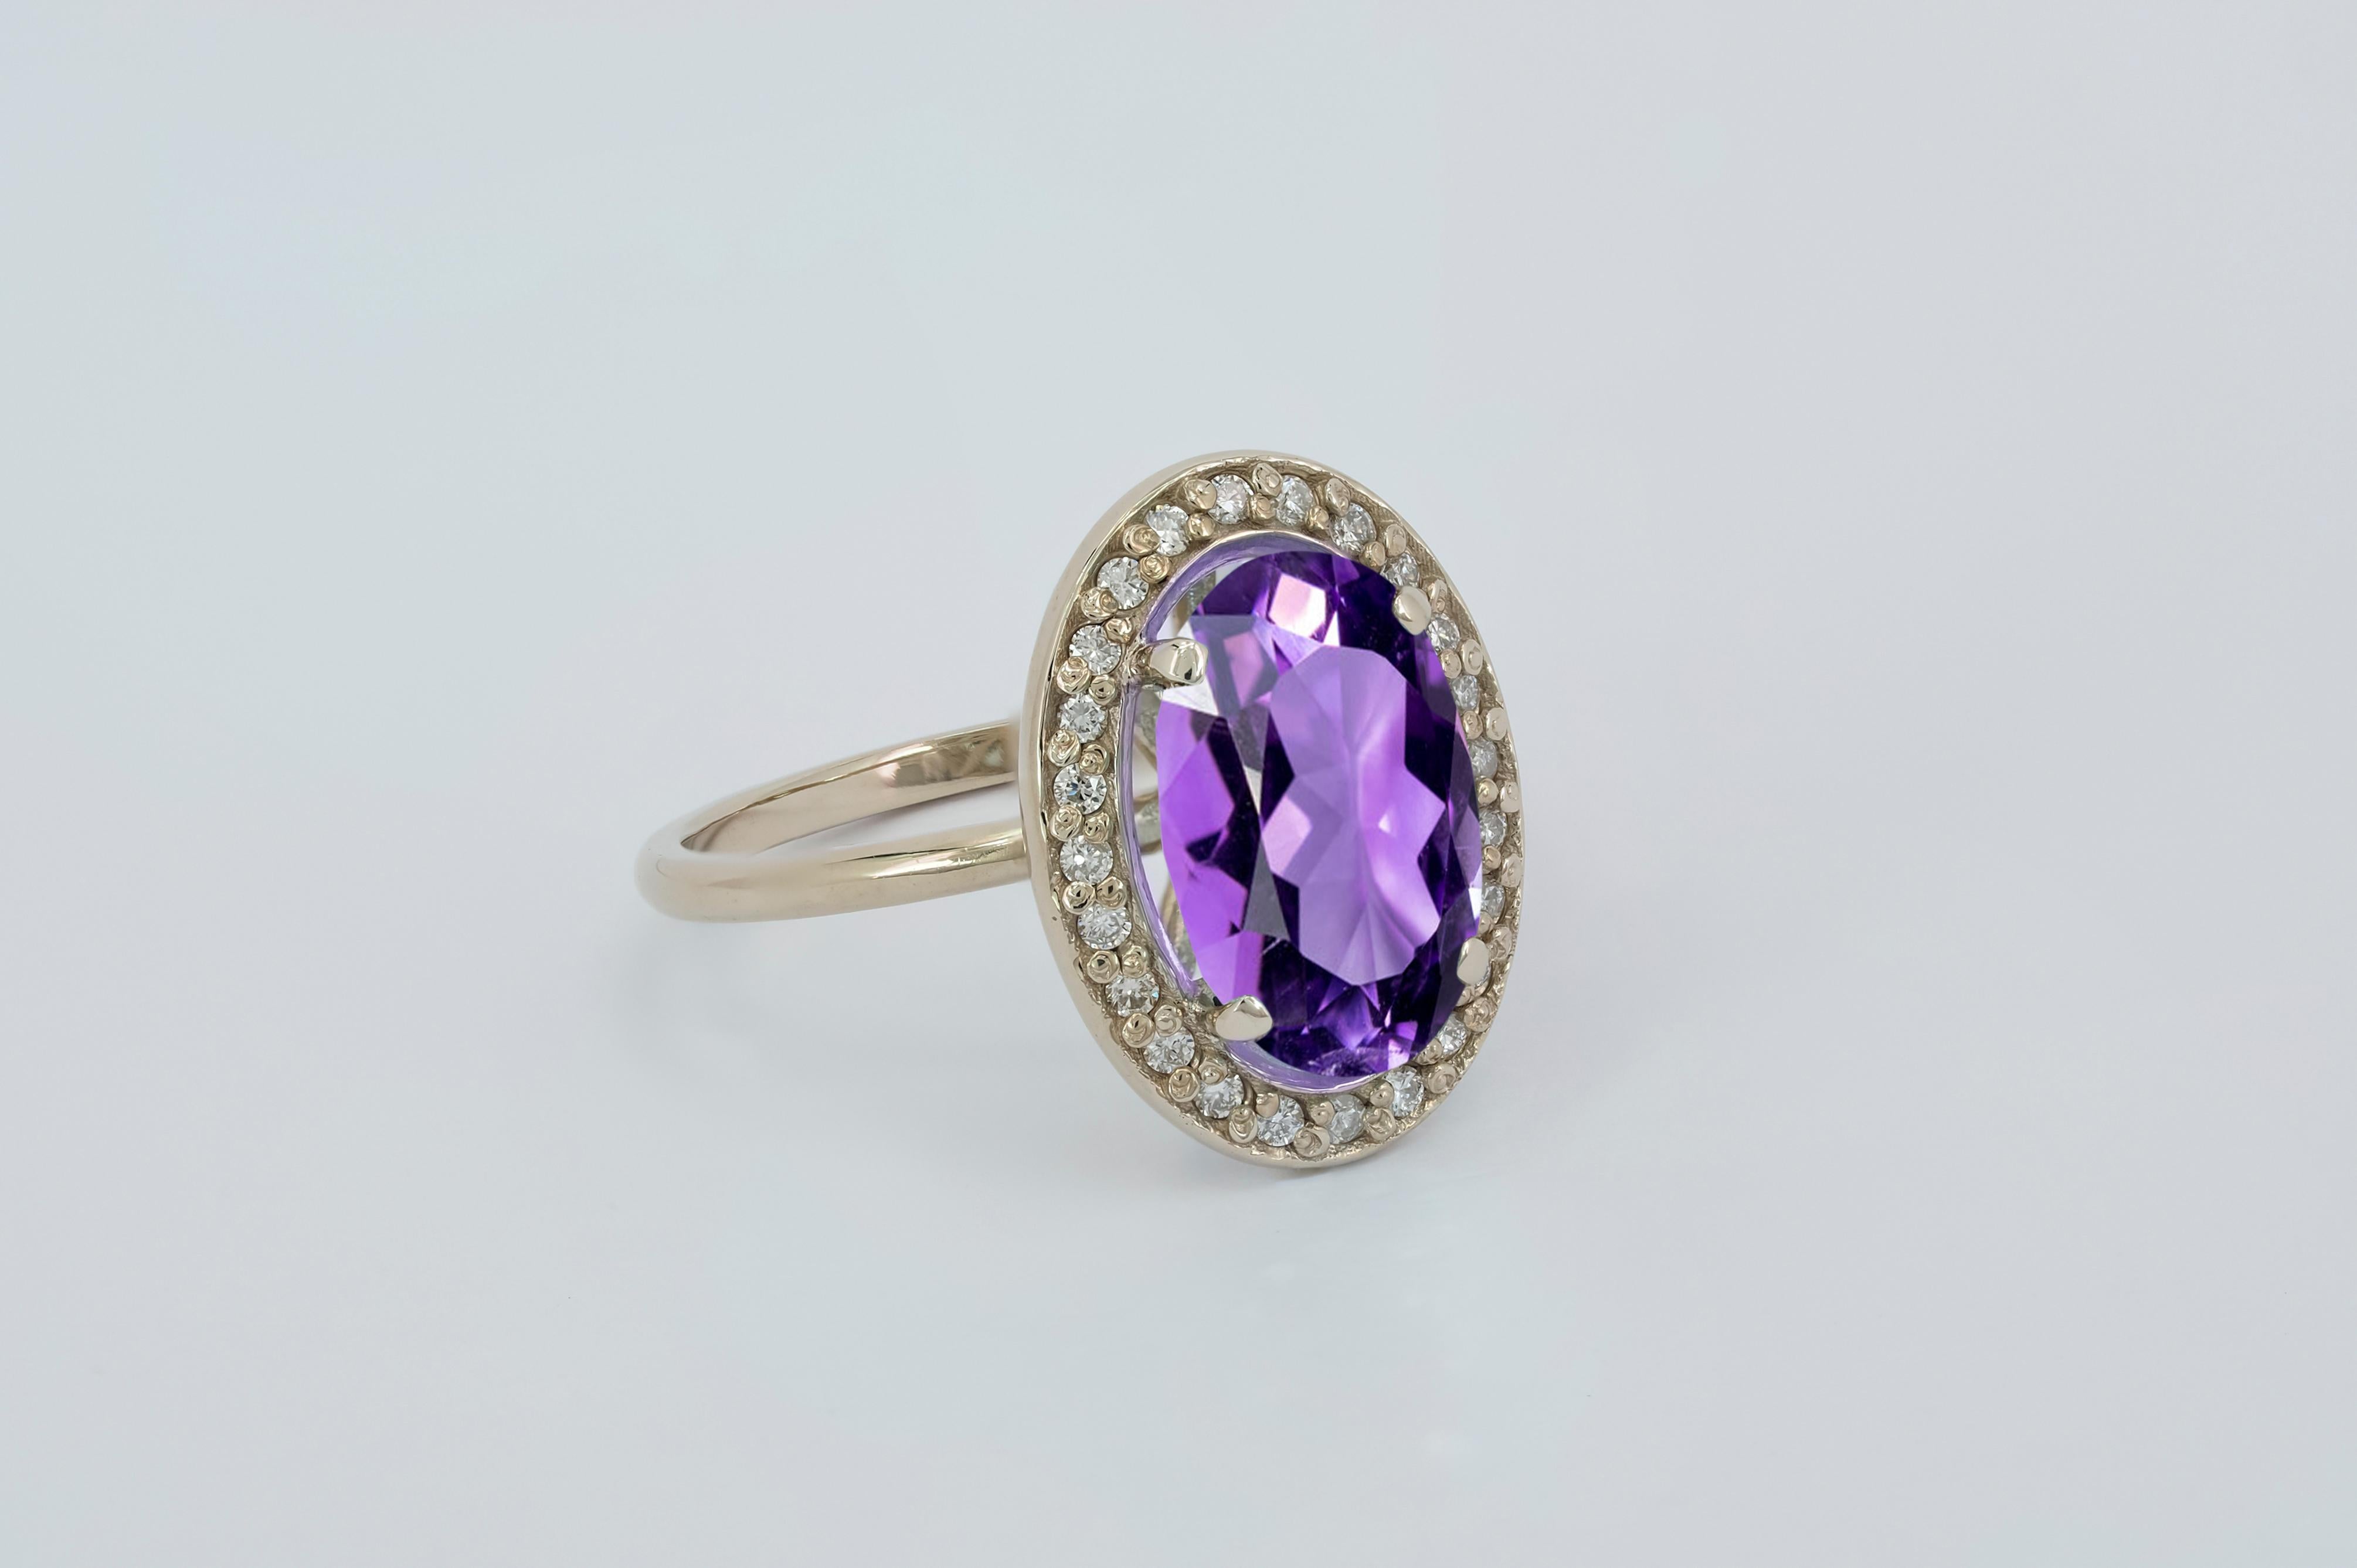 Oval Cut Amethyst and diamonds 14k gold ring. 